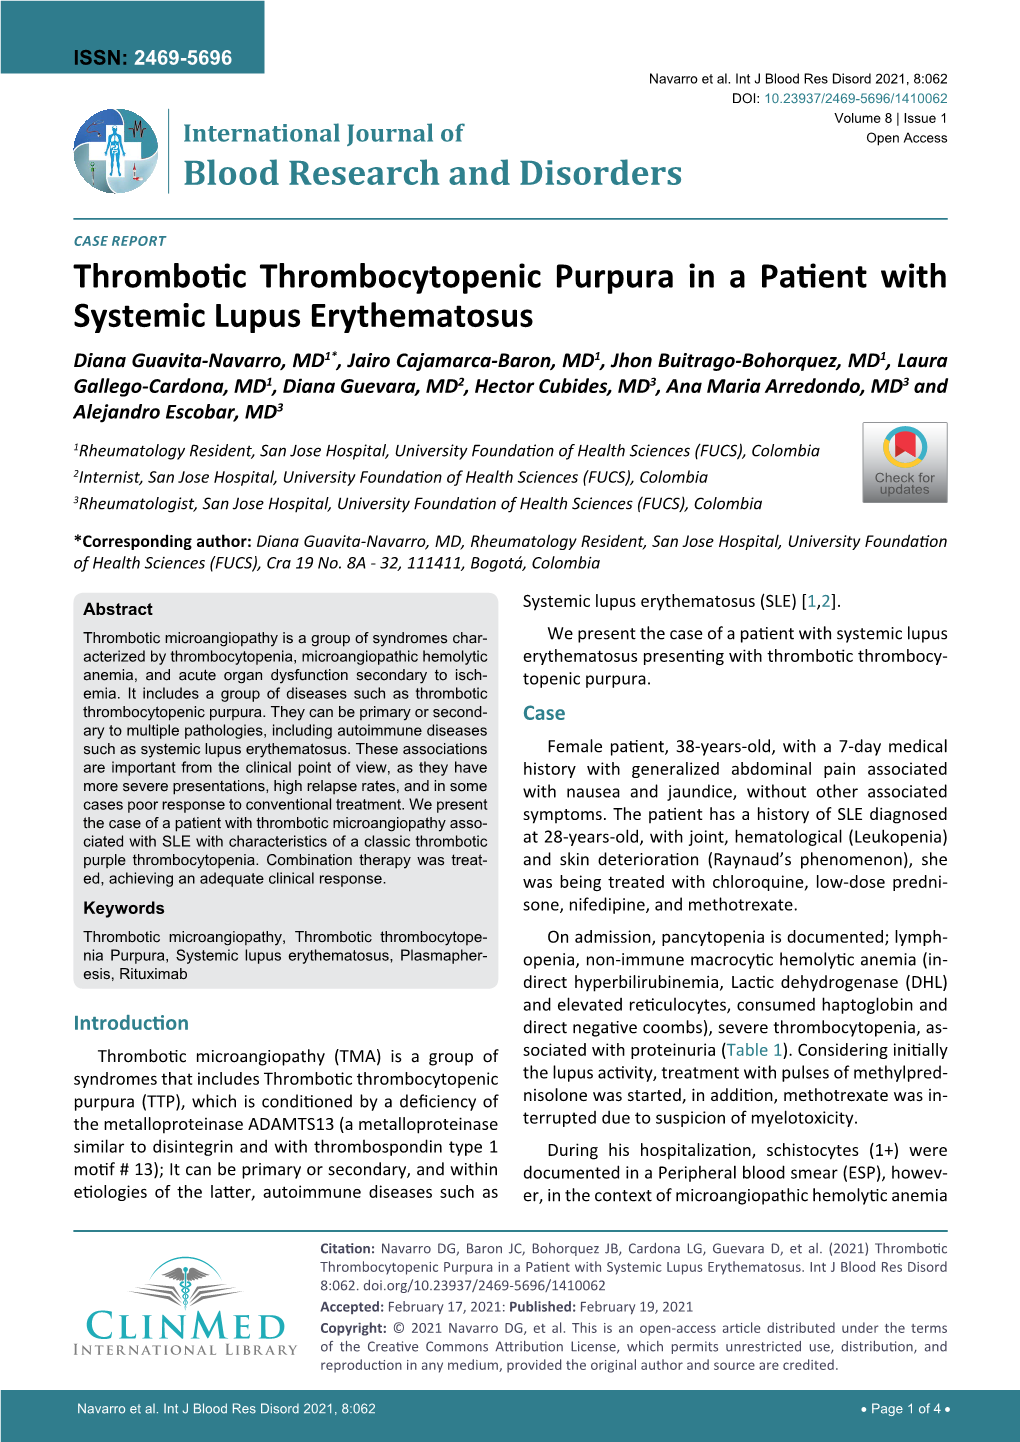 Thrombotic Thrombocytopenic Purpura in a Patient with Systemic